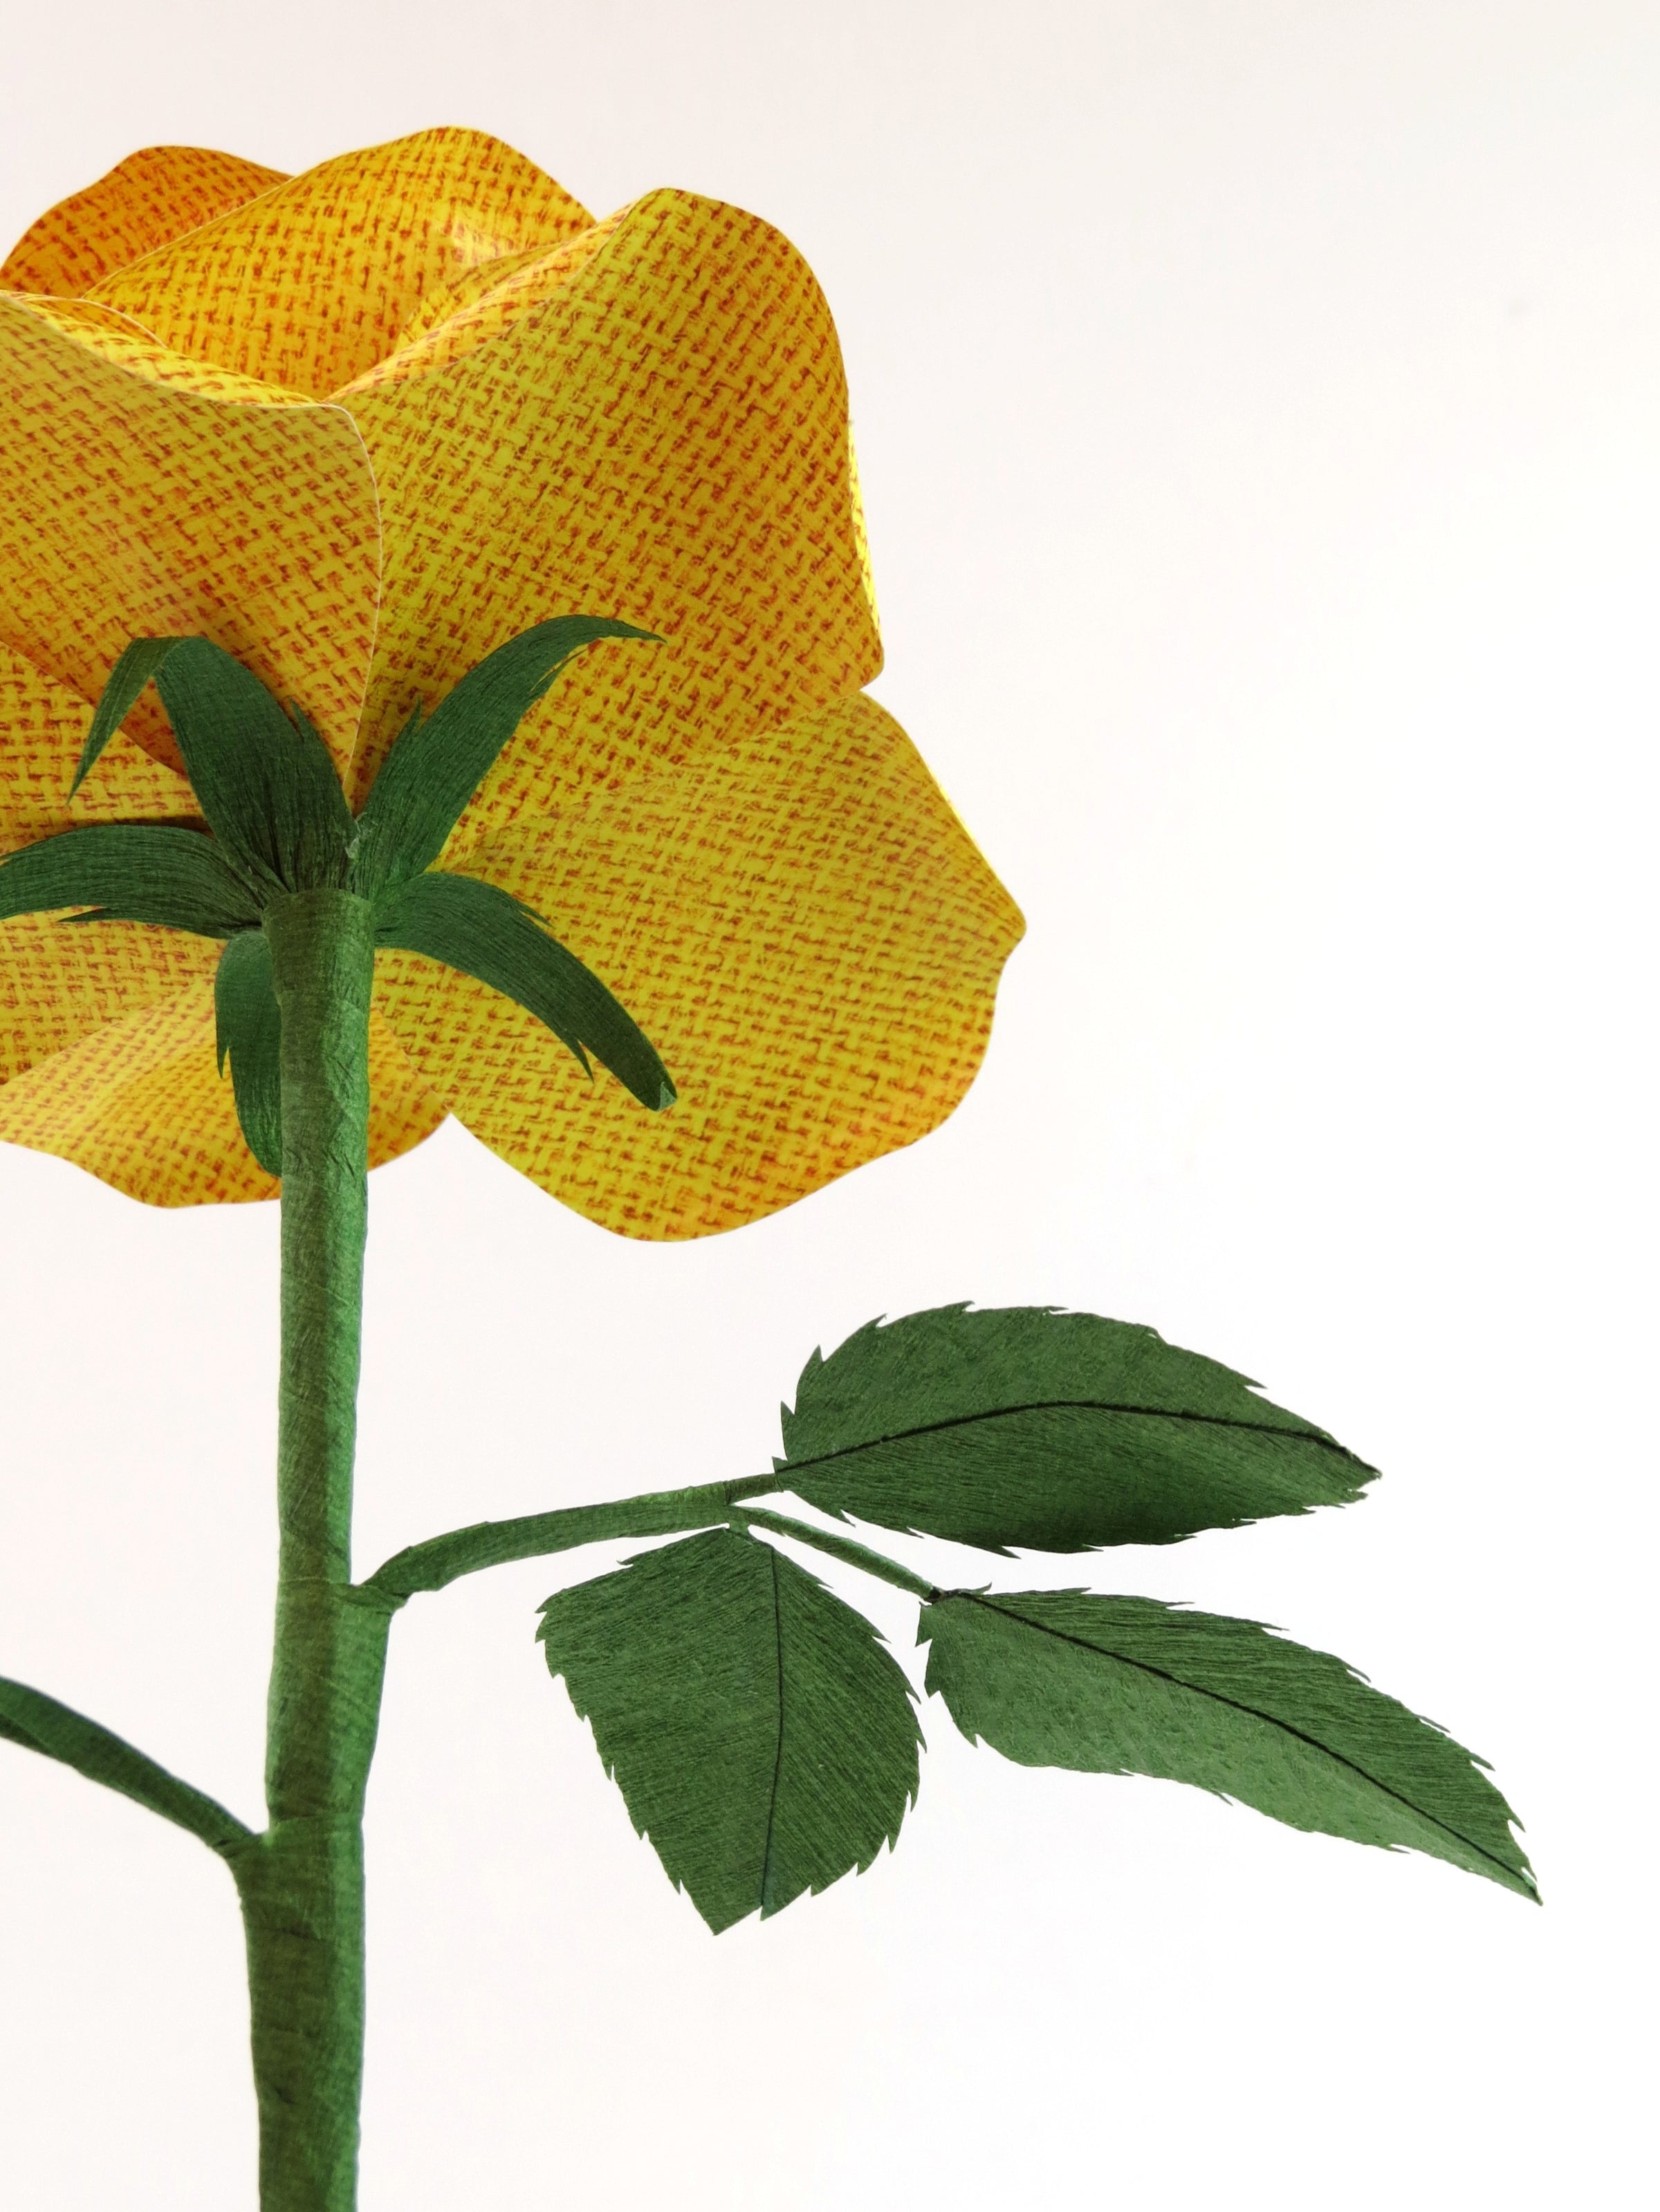 Detailed view of the back of a yellow linen grain paper rose with a green curled calyx underneath the yellow petals, and the green stem and leaves just showing